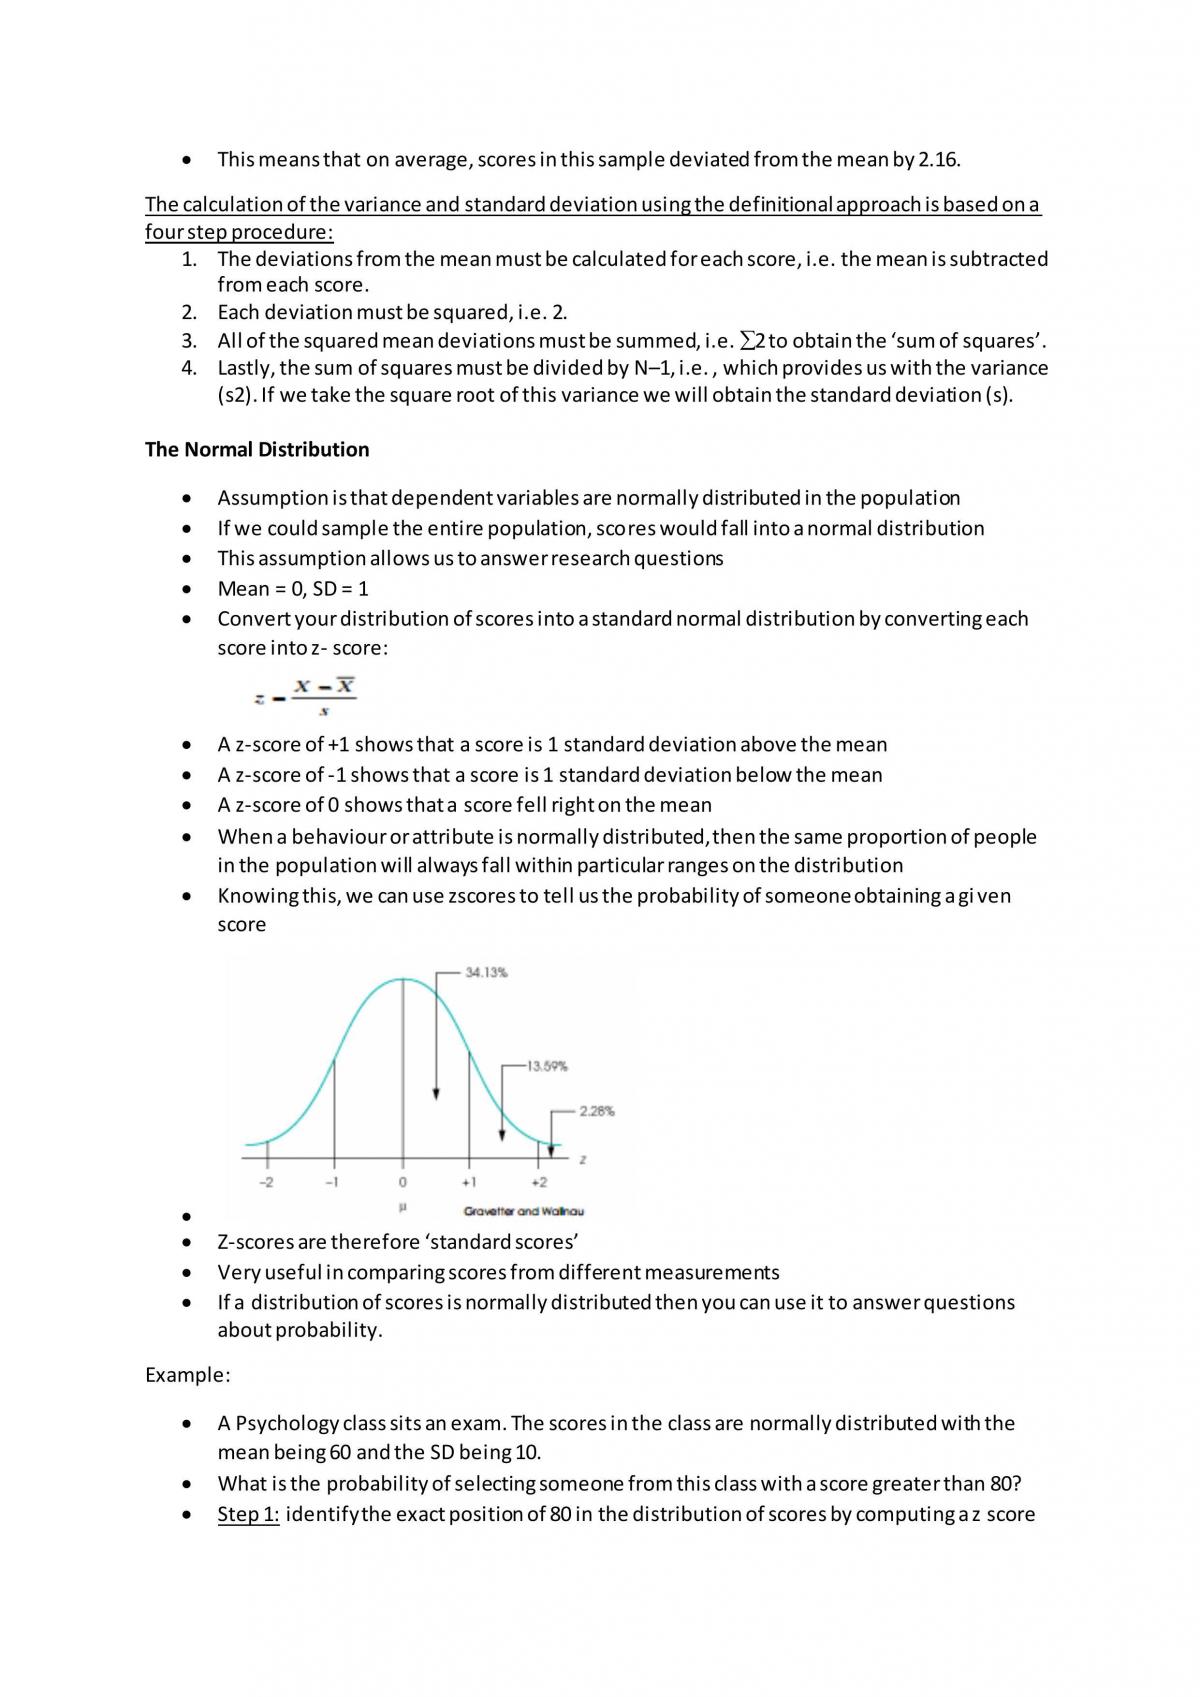 HPS201 Research Methods A - Complete Study Notes - Page 3